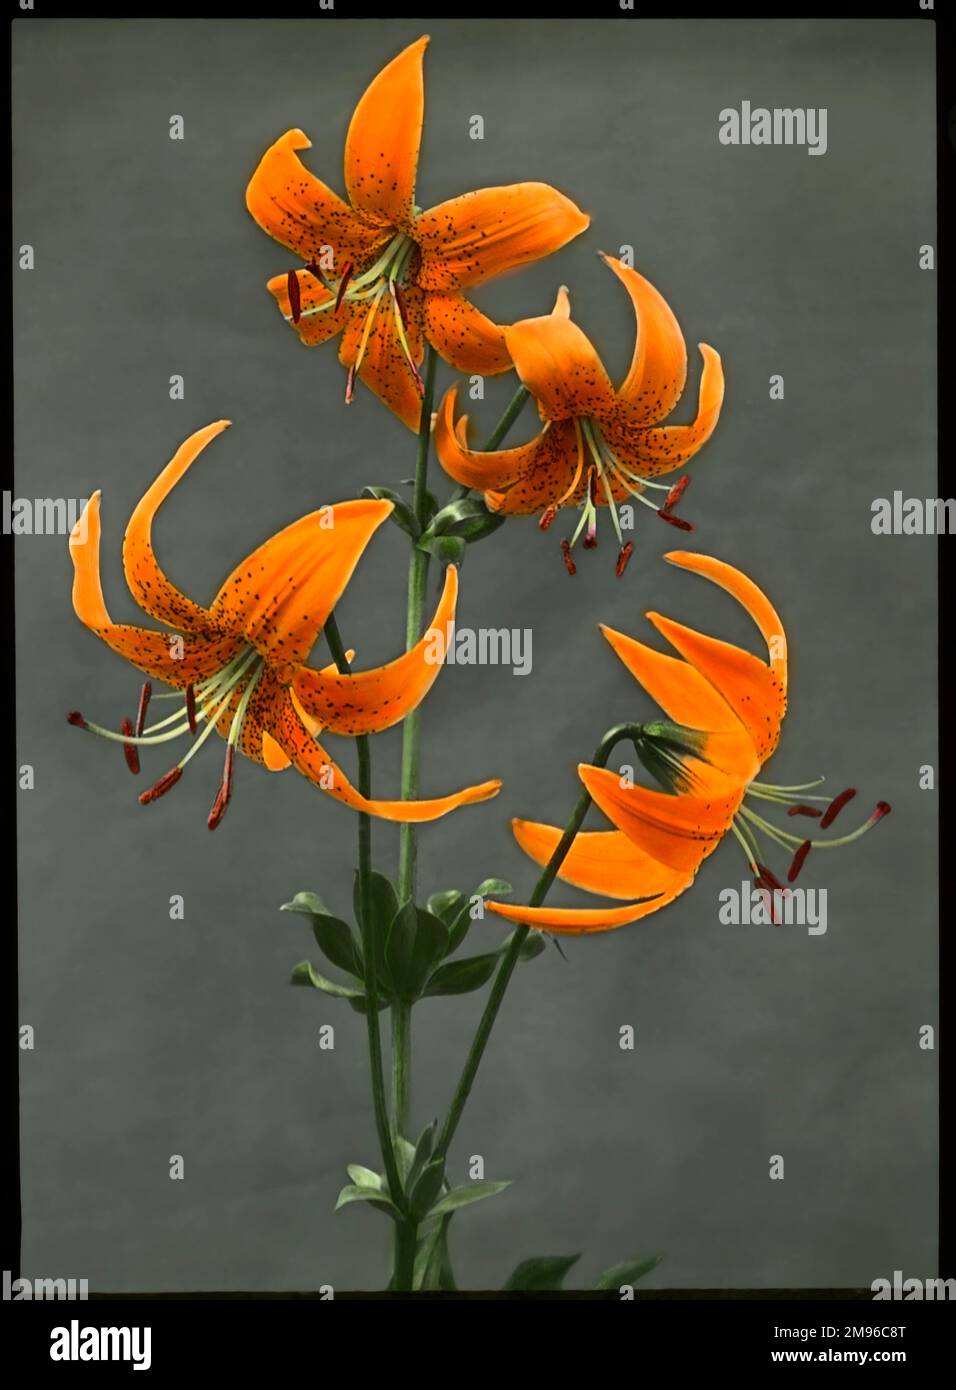 Lilium Humboldtii (Humboldt's Lily), a flower of the Liliaceae family, with bright orange flowers with red spots.  It is named after the naturalist and explorer, Alexander von Humboldt. Stock Photo